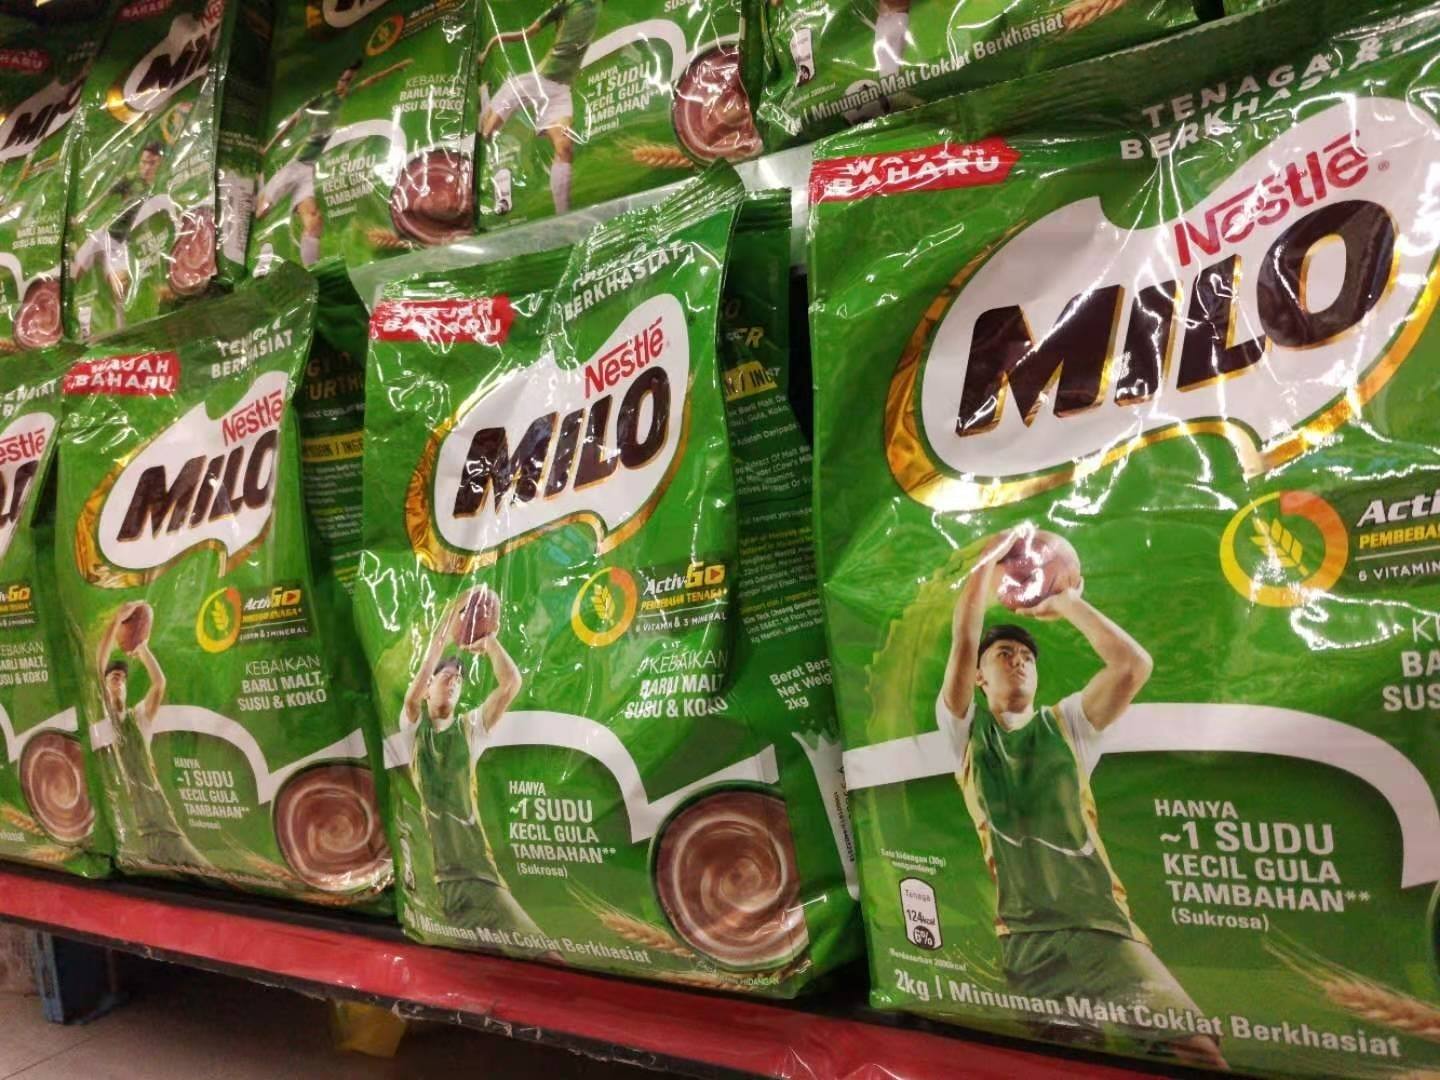 A 43-year-old mother to 4 children faces 14 months in jail for stealing 2 packets of MILO. Image credit: Doremart Supermarket